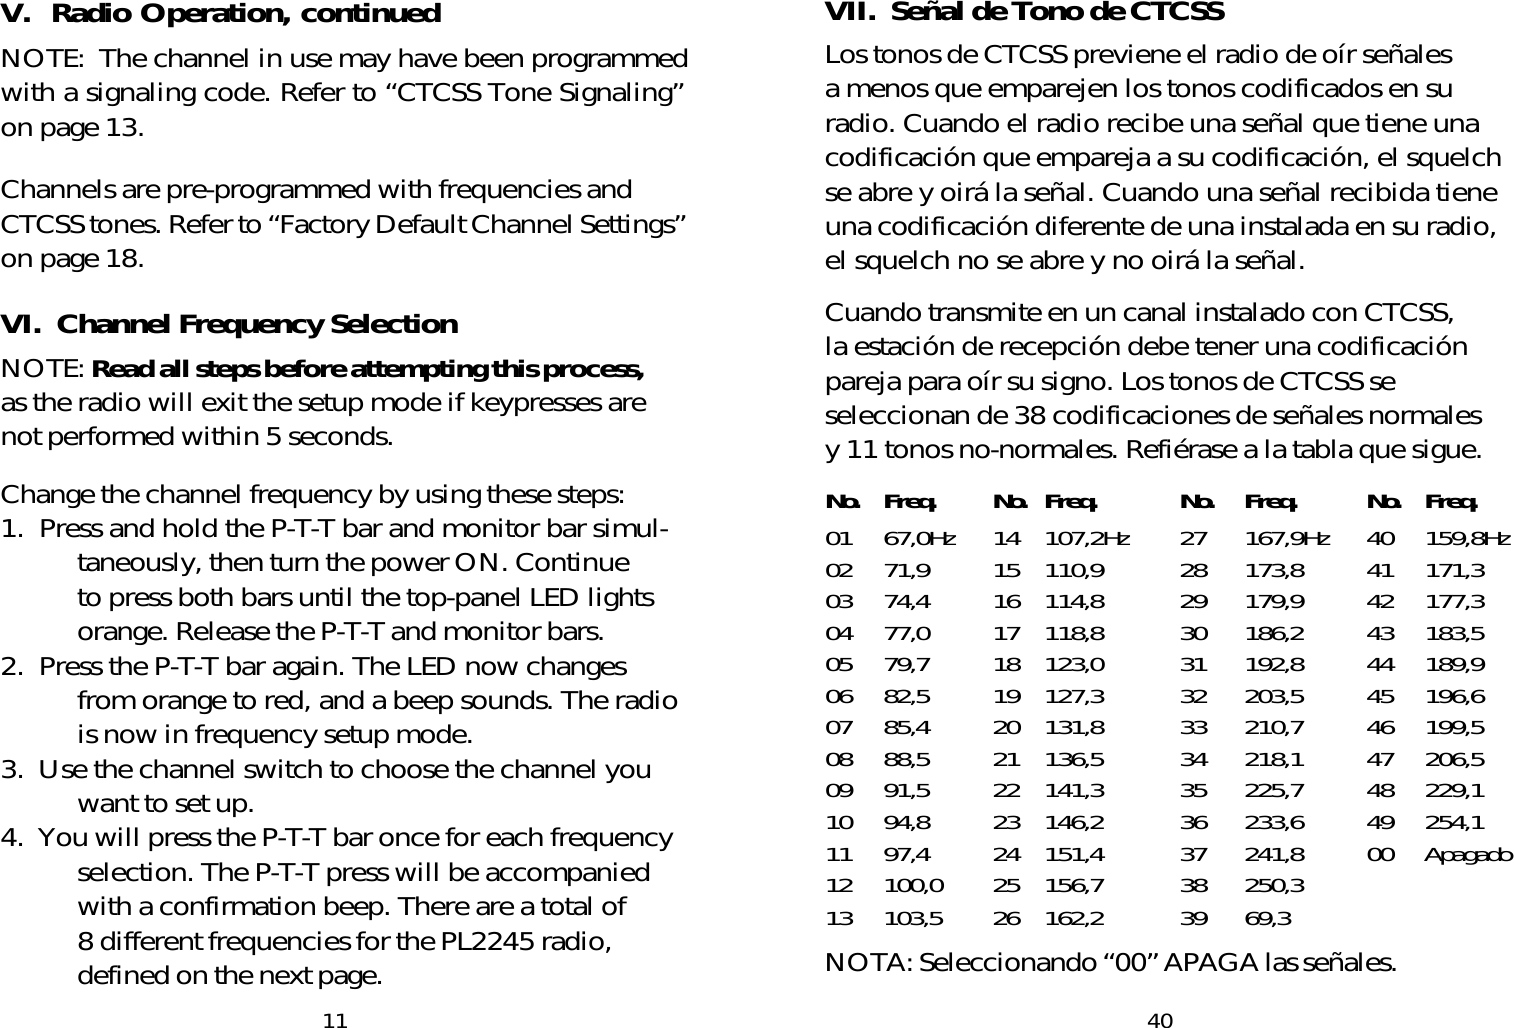 V.  Radio Operation, continuedNOTE:  The channel in use may have been programmedwith a signaling code. Refer to “CTCSS Tone Signaling”on page 13.Channels are pre-programmed with frequencies andCTCSS tones. Refer to “Factory Default Channel Settings”on page 18.VI.  Channel Frequency SelectionNOTE: Read all steps before attempting this process,as the radio will exit the setup mode if keypresses arenot performed within 5 seconds.Change the channel frequency by using these steps:1.  Press and hold the P-T-T bar and monitor bar simul-taneously, then turn the power ON. Continueto press both bars until the top-panel LED lightsorange. Release the P-T-T and monitor bars.2.  Press the P-T-T bar again. The LED now changesfrom orange to red, and a beep sounds. The radiois now in frequency setup mode.3.  Use the channel switch to choose the channel youwant to set up.4.  You will press the P-T-T bar once for each frequencyselection. The P-T-T press will be accompaniedwith a confirmation beep. There are a total of8 different frequencies for the PL2245 radio,defined on the next page.11VII.  Señal de Tono de CTCSSLos tonos de CTCSS previene el radio de oír señalesa menos que emparejen los tonos codificados en suradio. Cuando el radio recibe una señal que tiene unacodificación que empareja a su codificación, el squelchse abre y oirá la señal. Cuando una señal recibida tieneuna codificación diferente de una instalada en su radio,el squelch no se abre y no oirá la señal.Cuando transmite en un canal instalado con CTCSS,la estación de recepción debe tener una codificaciónpareja para oír su signo. Los tonos de CTCSS seseleccionan de 38 codificaciones de señales normalesy 11 tonos no-normales. Refiérase a la tabla que sigue.No. Freq. No. Freq. No. Freq. No. Freq.01 67,0Hz 14 107,2Hz 27 167,9Hz 40 159,8Hz02 71,9 15 110,9 28 173,8 41 171,303 74,4 16 114,8 29 179,9 42 177,304 77,0 17 118,8 30 186,2 43 183,505 79,7 18 123,0 31 192,8 44 189,906 82,5 19 127,3 32 203,5 45 196,607 85,4 20 131,8 33 210,7 46 199,508 88,5 21 136,5 34 218,1 47 206,509 91,5 22 141,3 35 225,7 48 229,110 94,8 23 146,2 36 233,6 49 254,111 97,4 24 151,4 37 241,8 00 Apagado12 100,0 25 156,7 38 250,313 103,5 26 162,2 39 69,3NOTA: Seleccionando “00” APAGA las señales.40